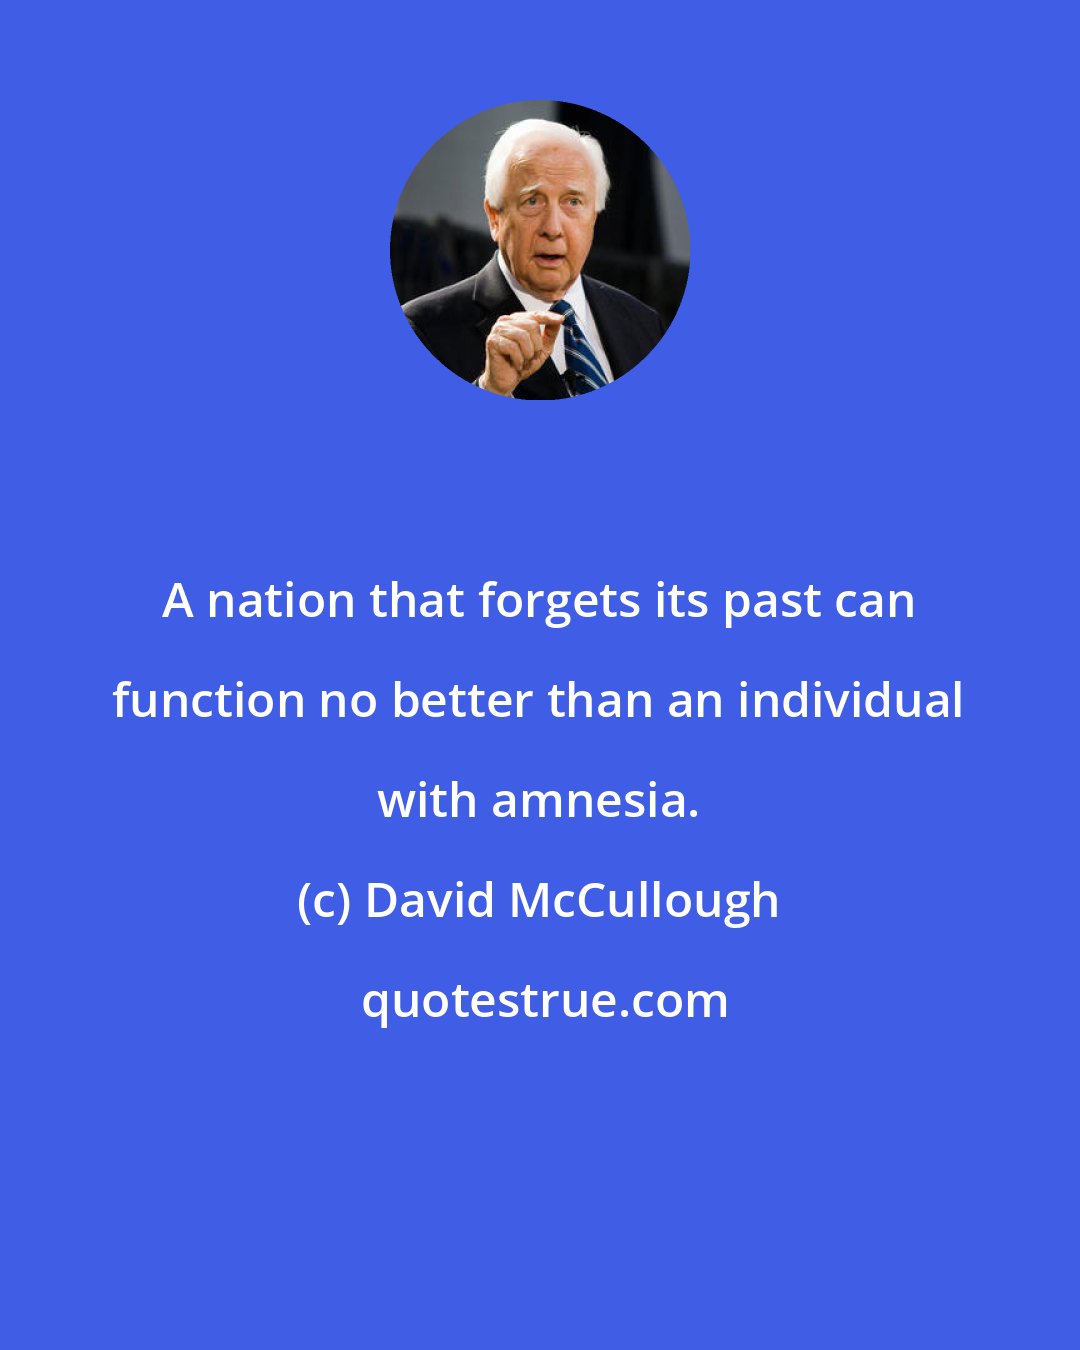 David McCullough: A nation that forgets its past can function no better than an individual with amnesia.